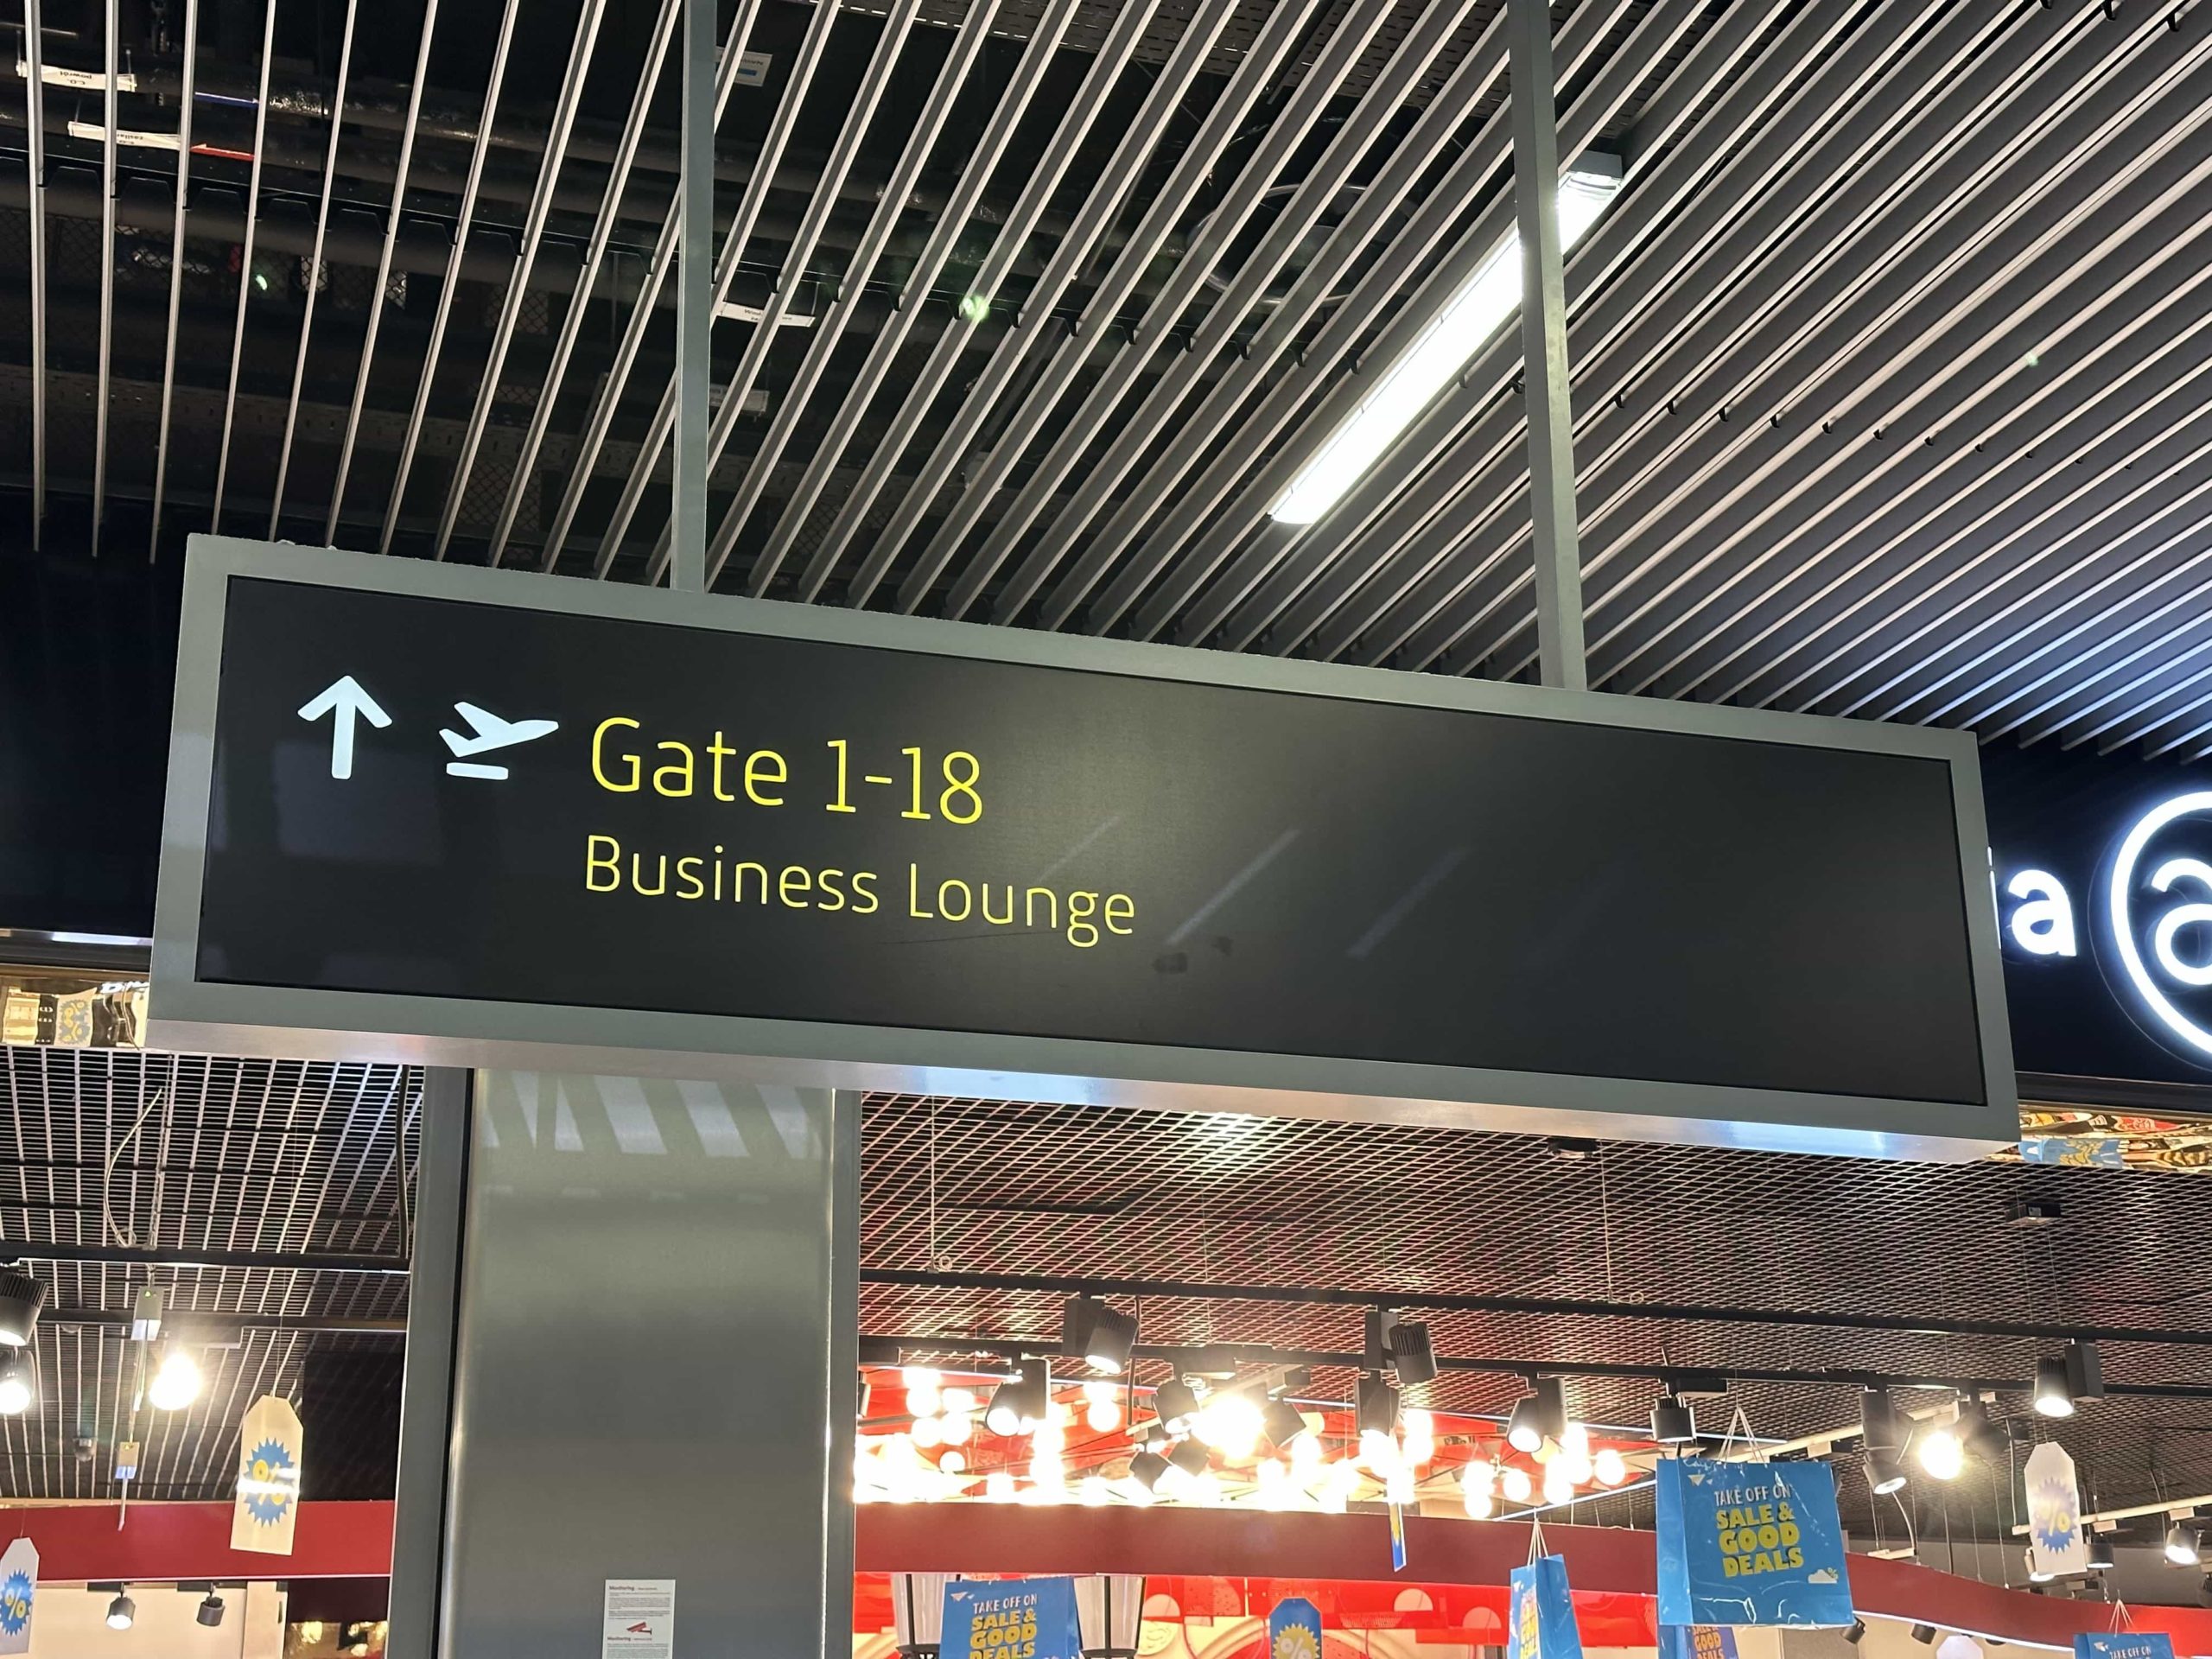 Overhead signage with directions to gates 1 to 18 and a business lounge